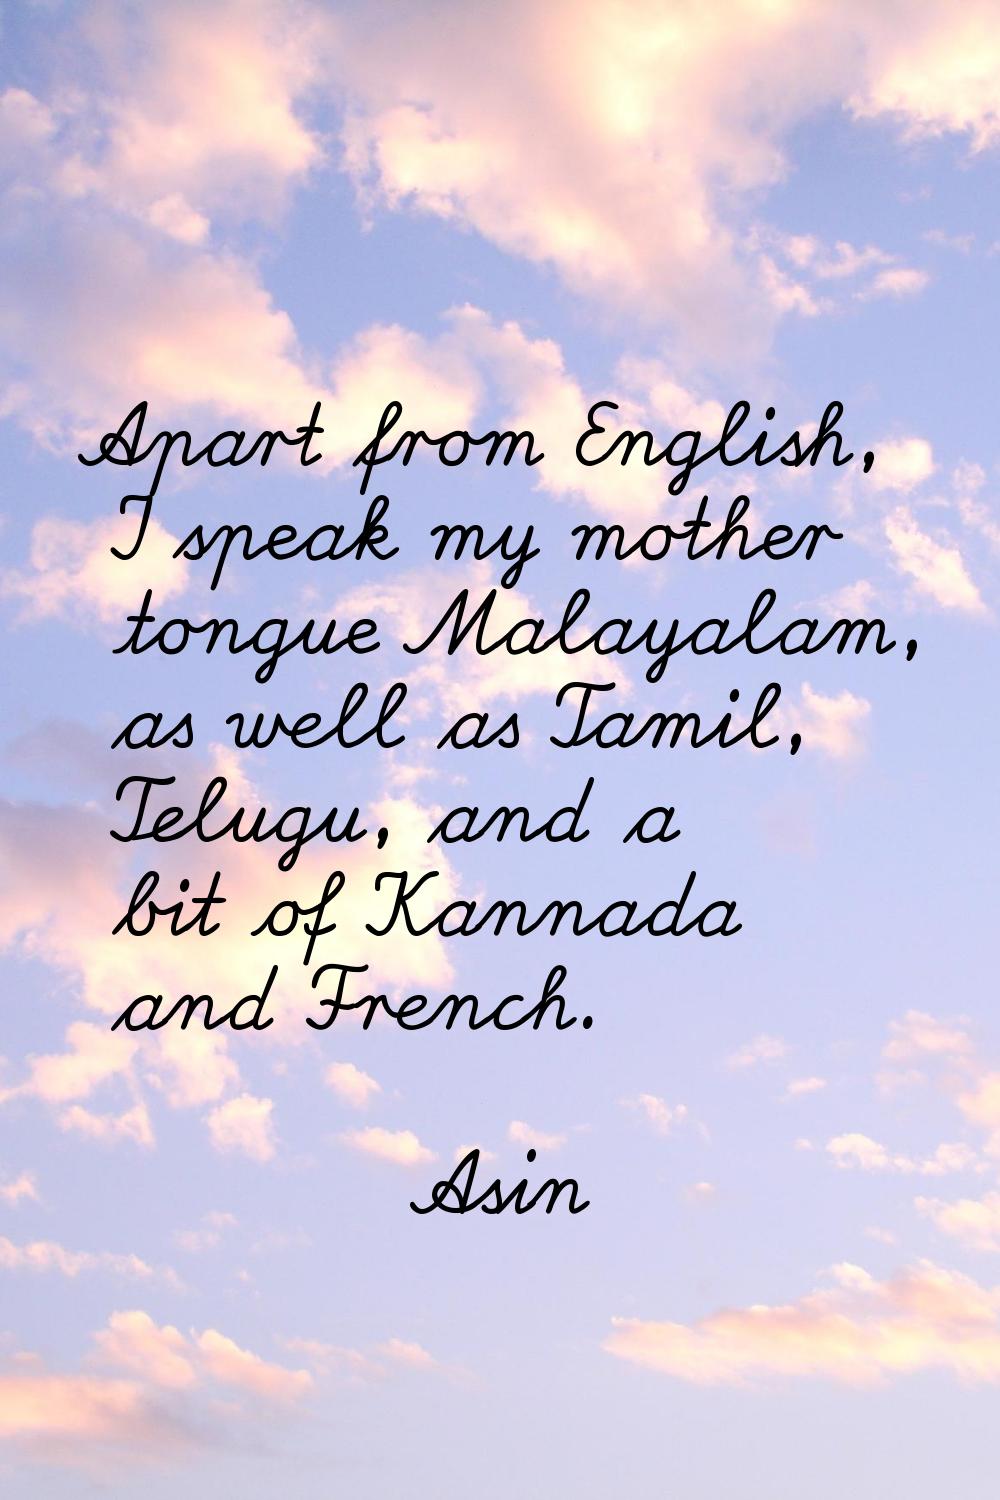 Apart from English, I speak my mother tongue Malayalam, as well as Tamil, Telugu, and a bit of Kann